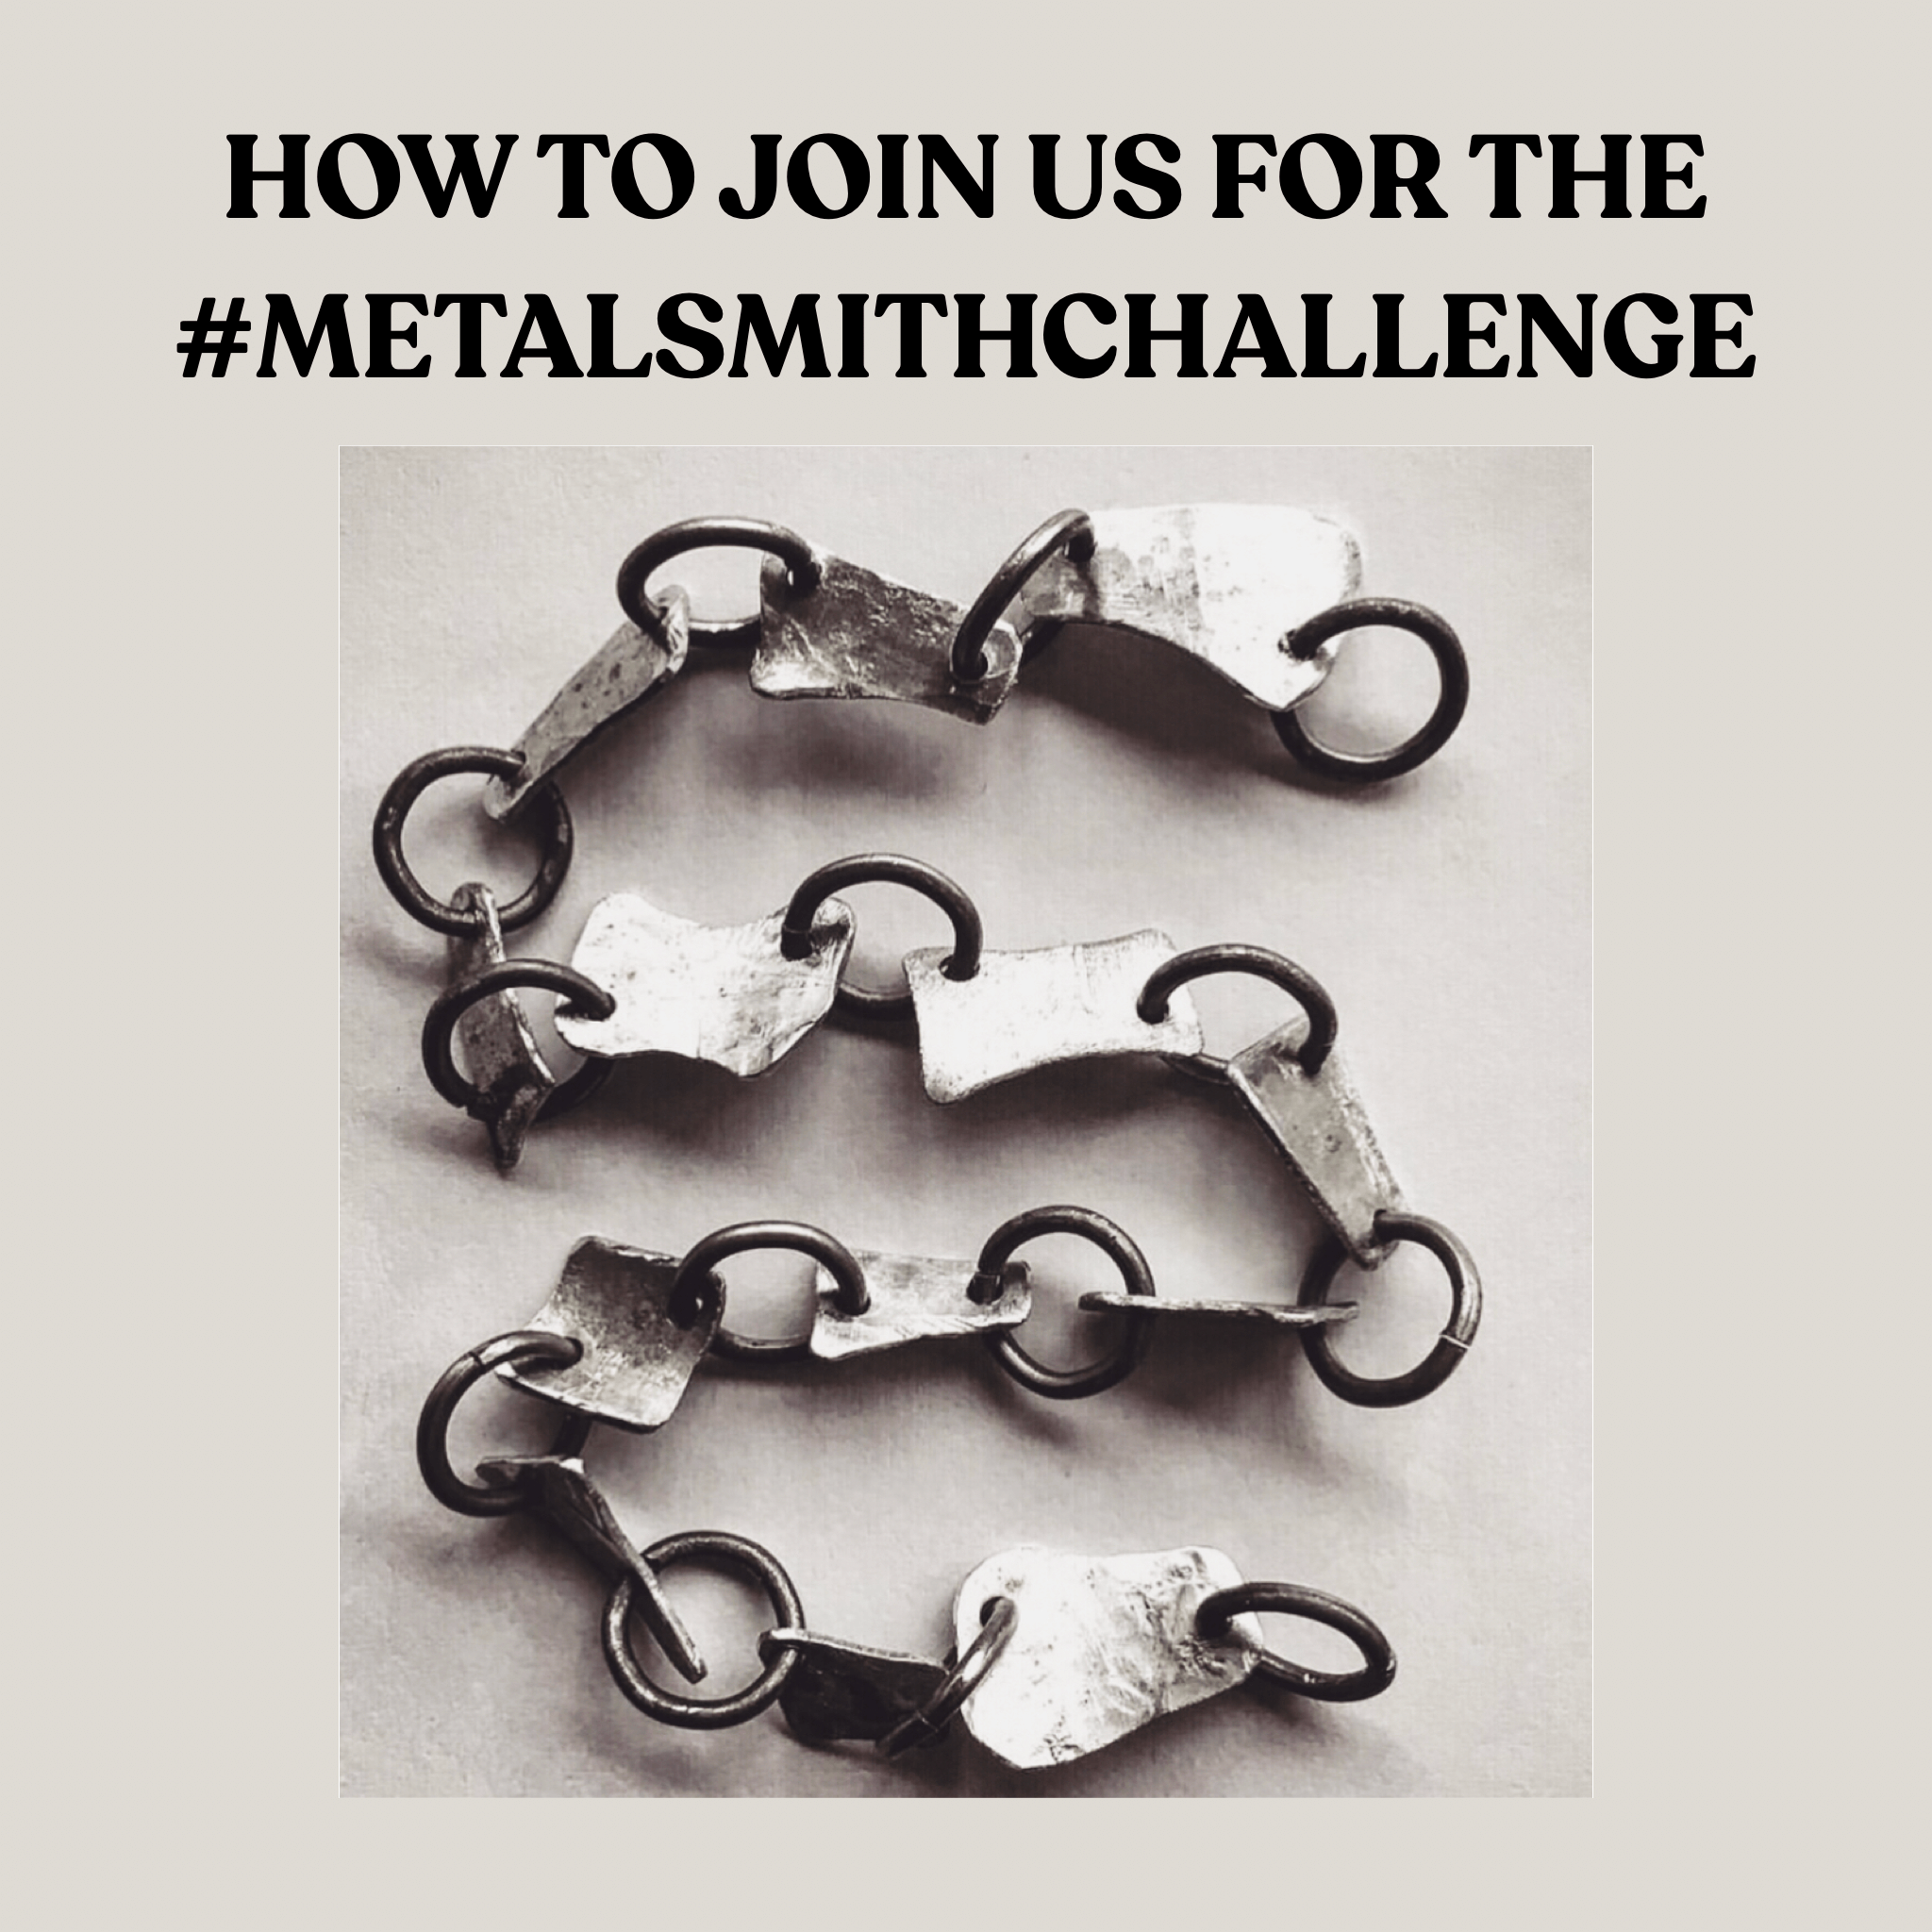 JOIN US FOR THE METALSMITHCHALLENGE